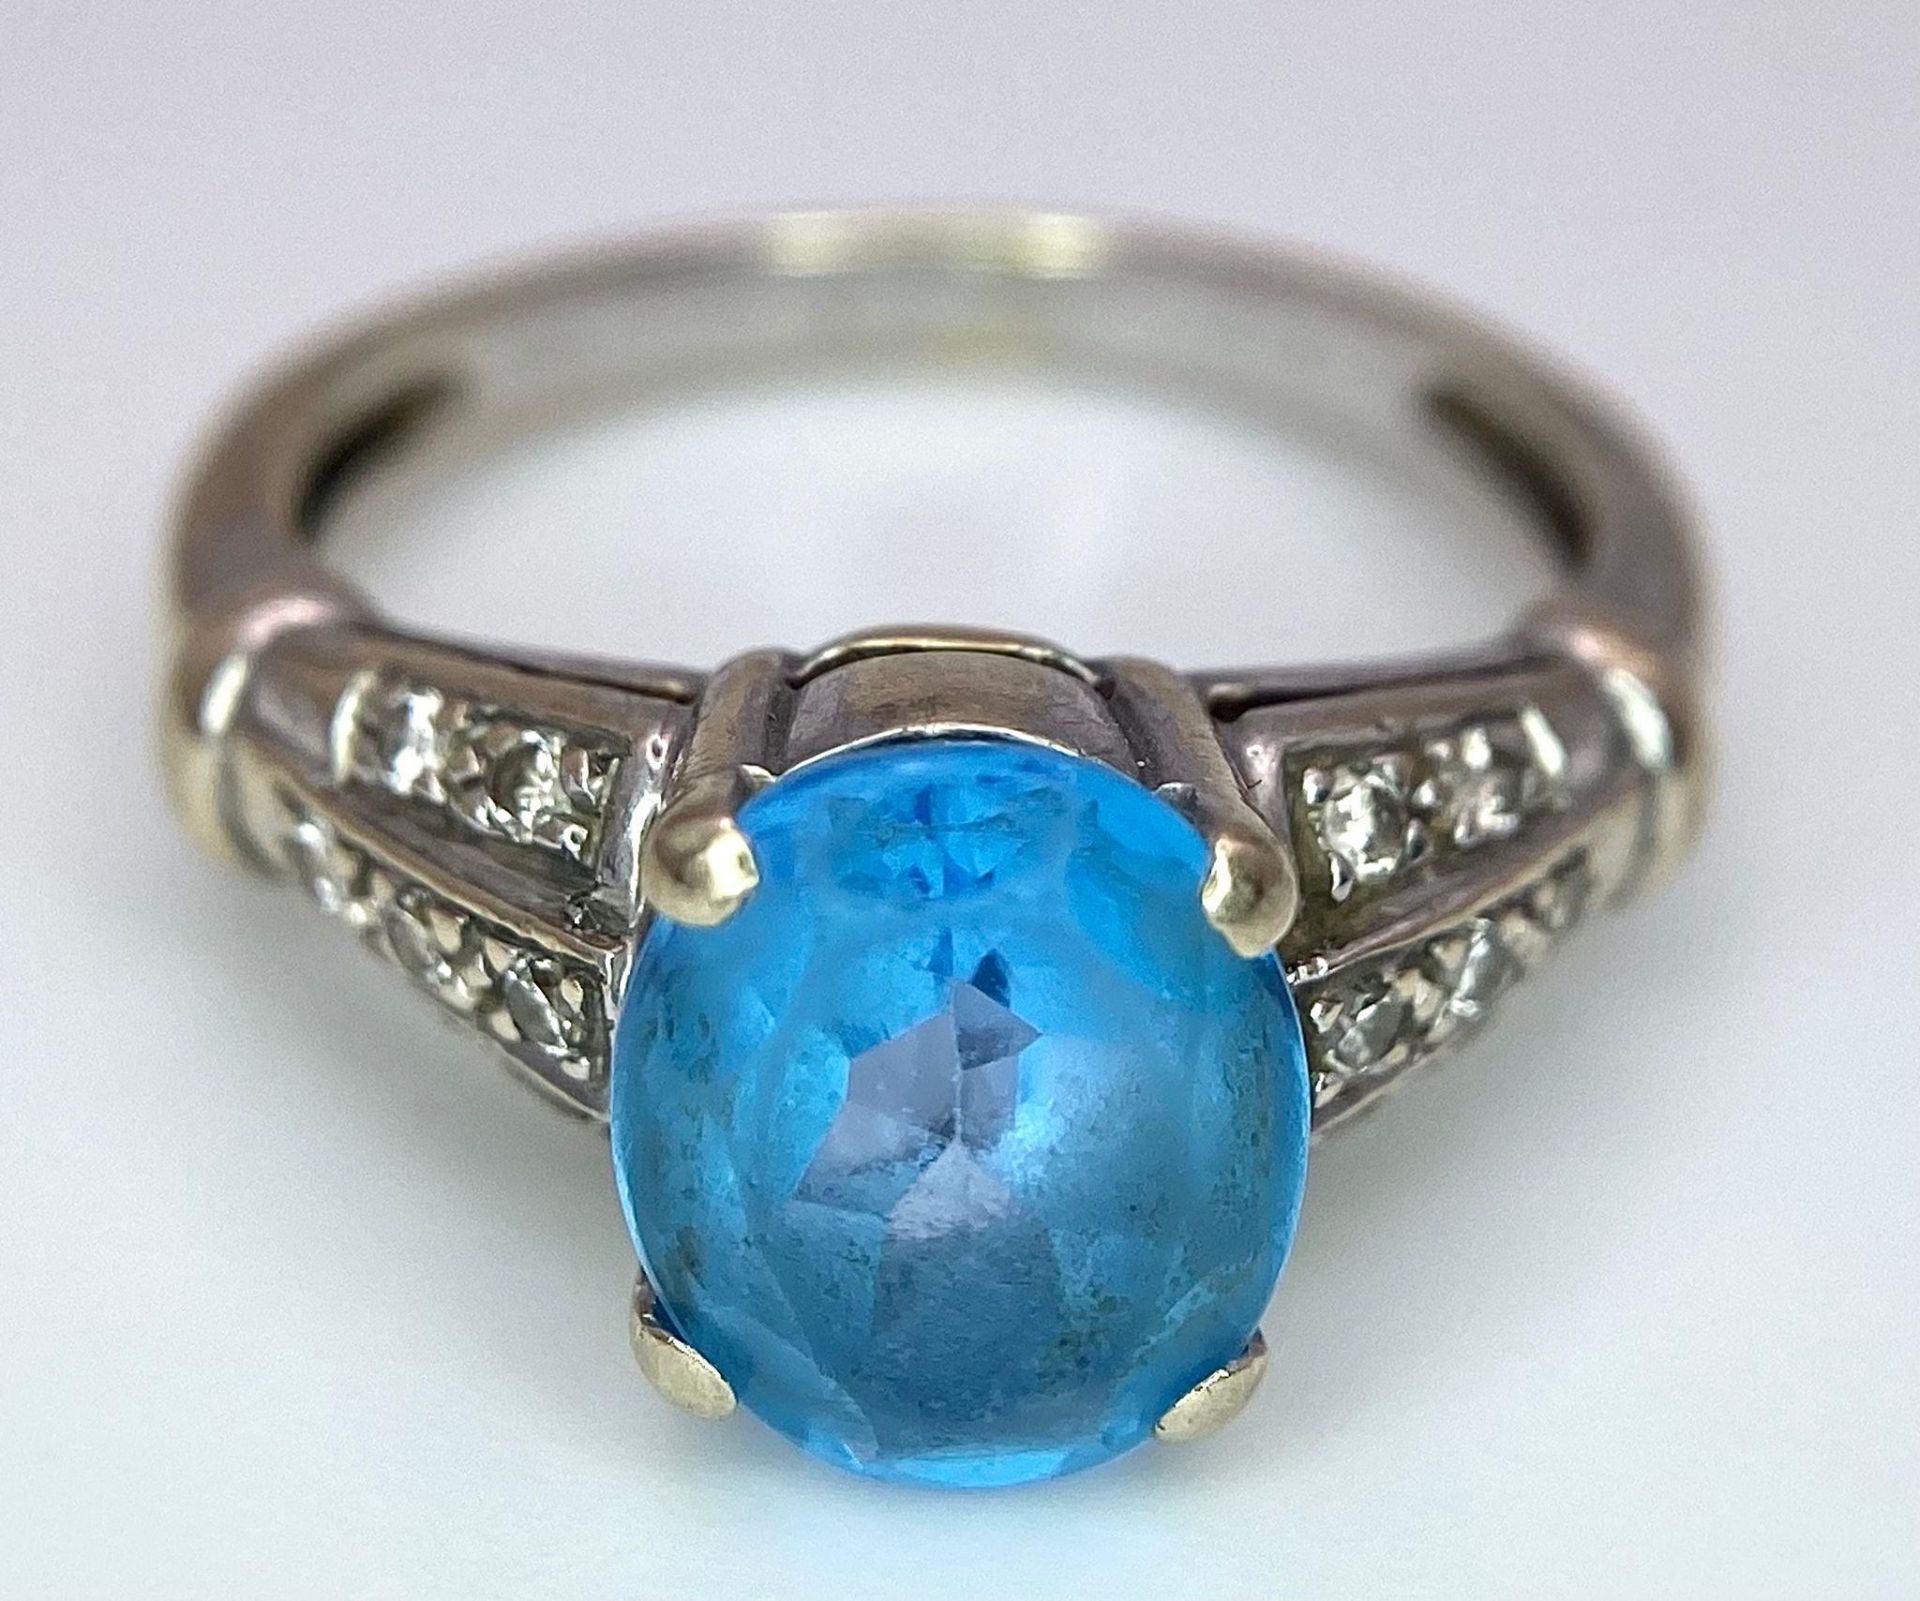 A vintage, 9 K white gold ring with a large, oval cut, vivid blue aquamarine and three bands of - Image 4 of 5